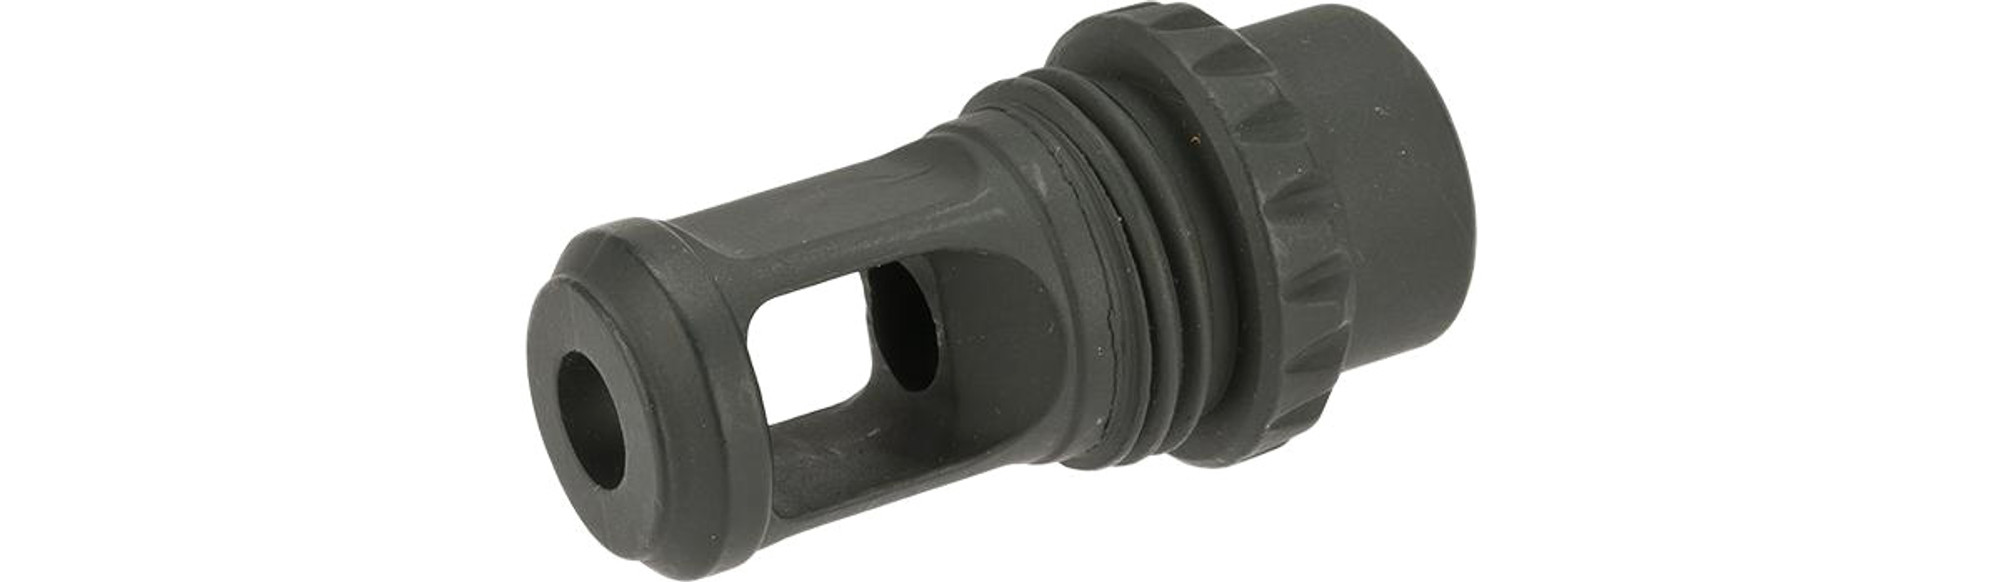 EMG 14mm Positive Metal Flash Hider for M4 Airsoft AEGs - Version 1